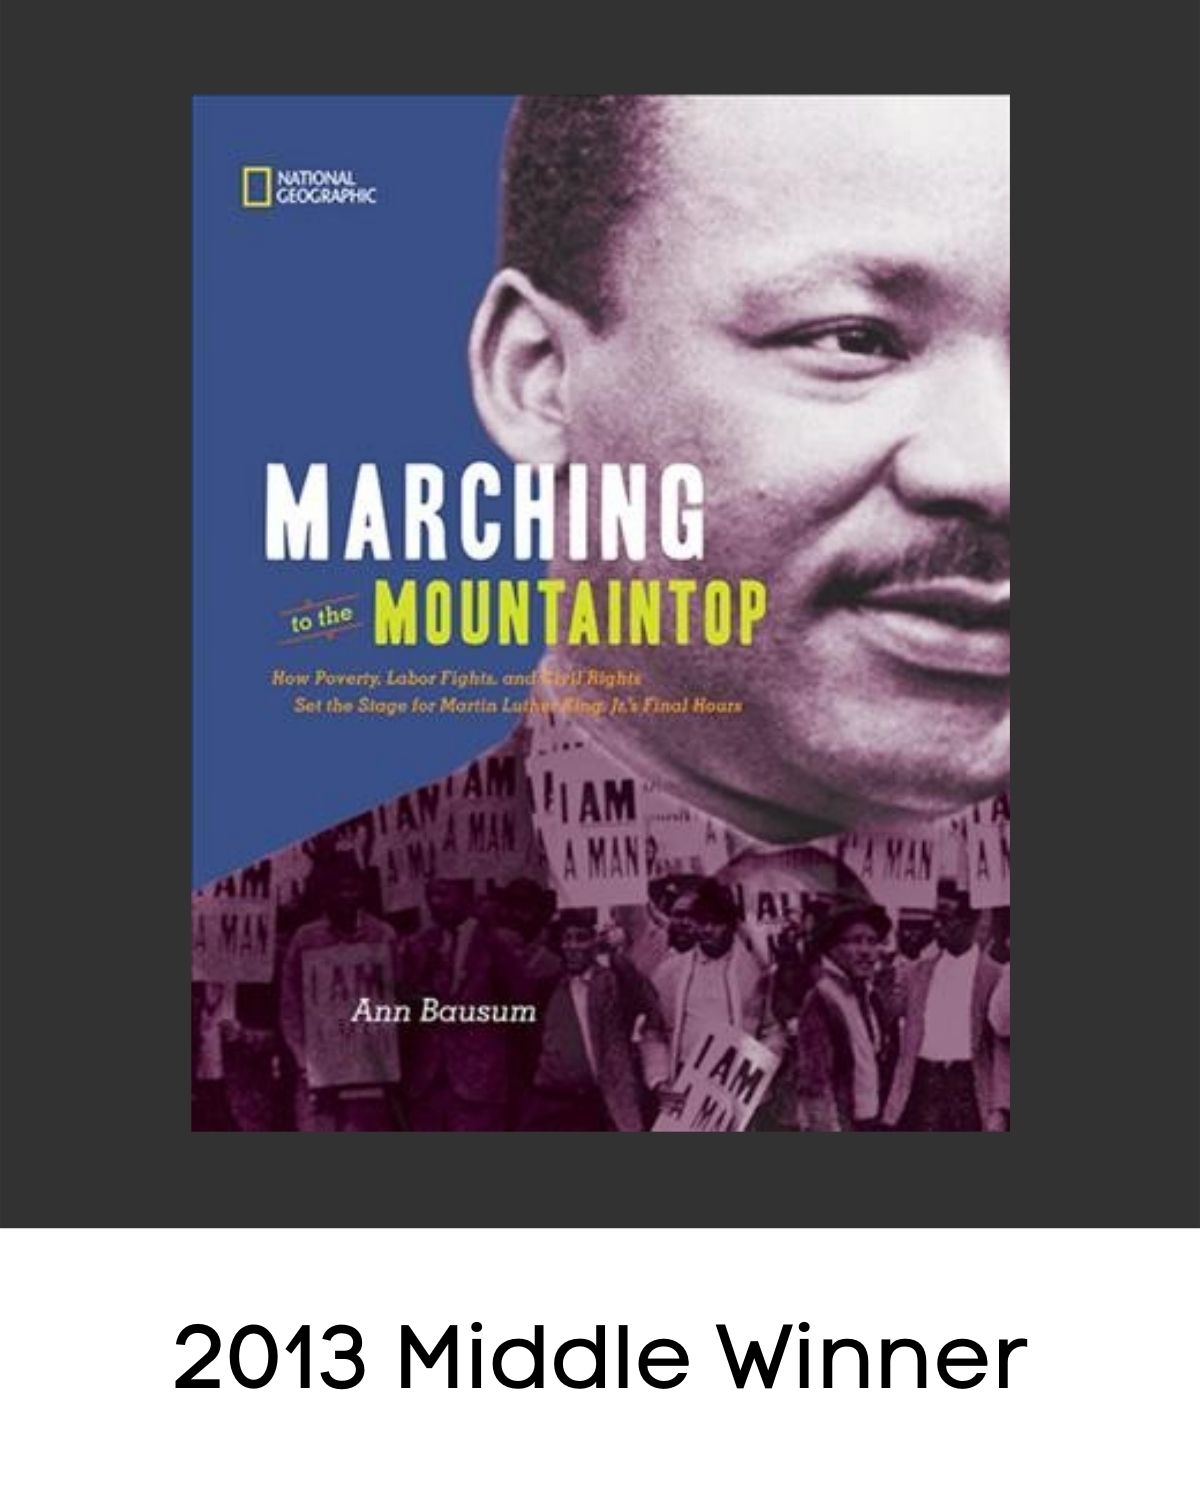 Marching to the Mountaintop: How Poverty, Labor Fights, and Civil Rights Set the Stage for Martin Luther King, Jr.’s Final Hours book cover